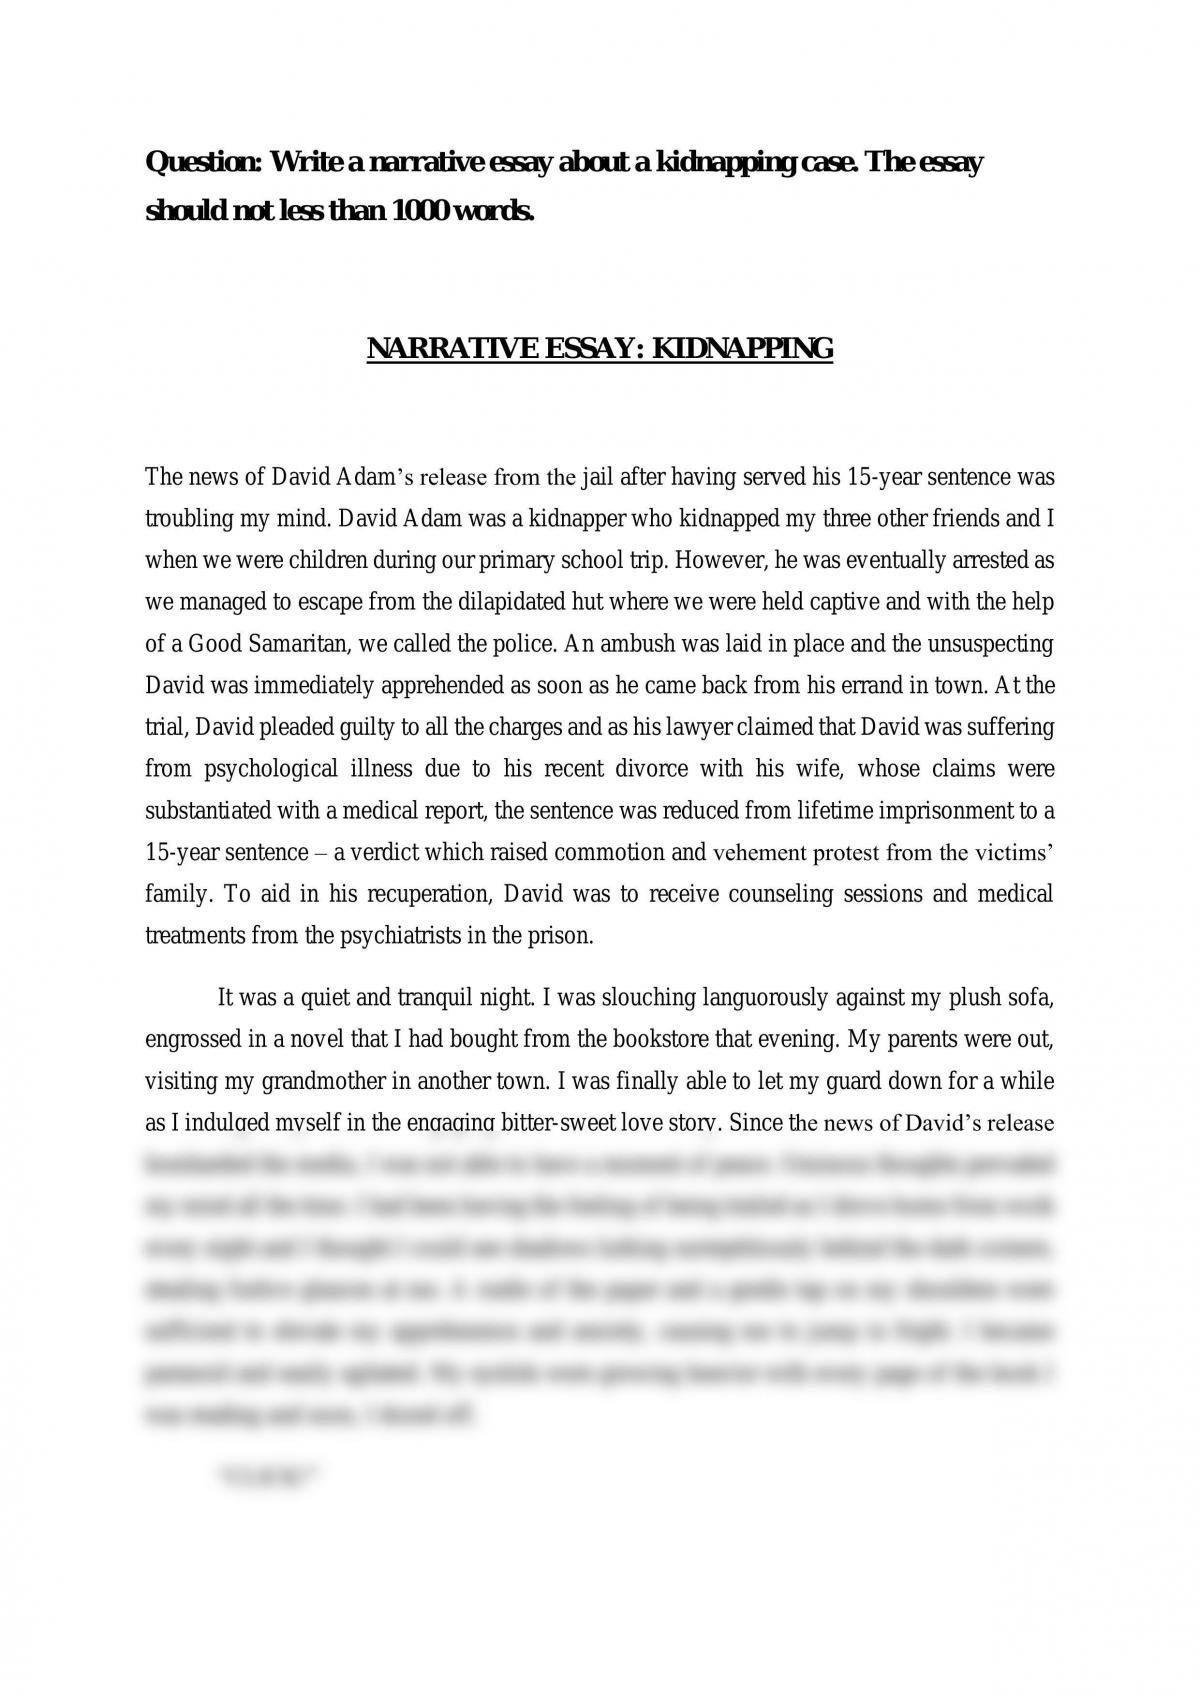 narrative essay on kidnapping